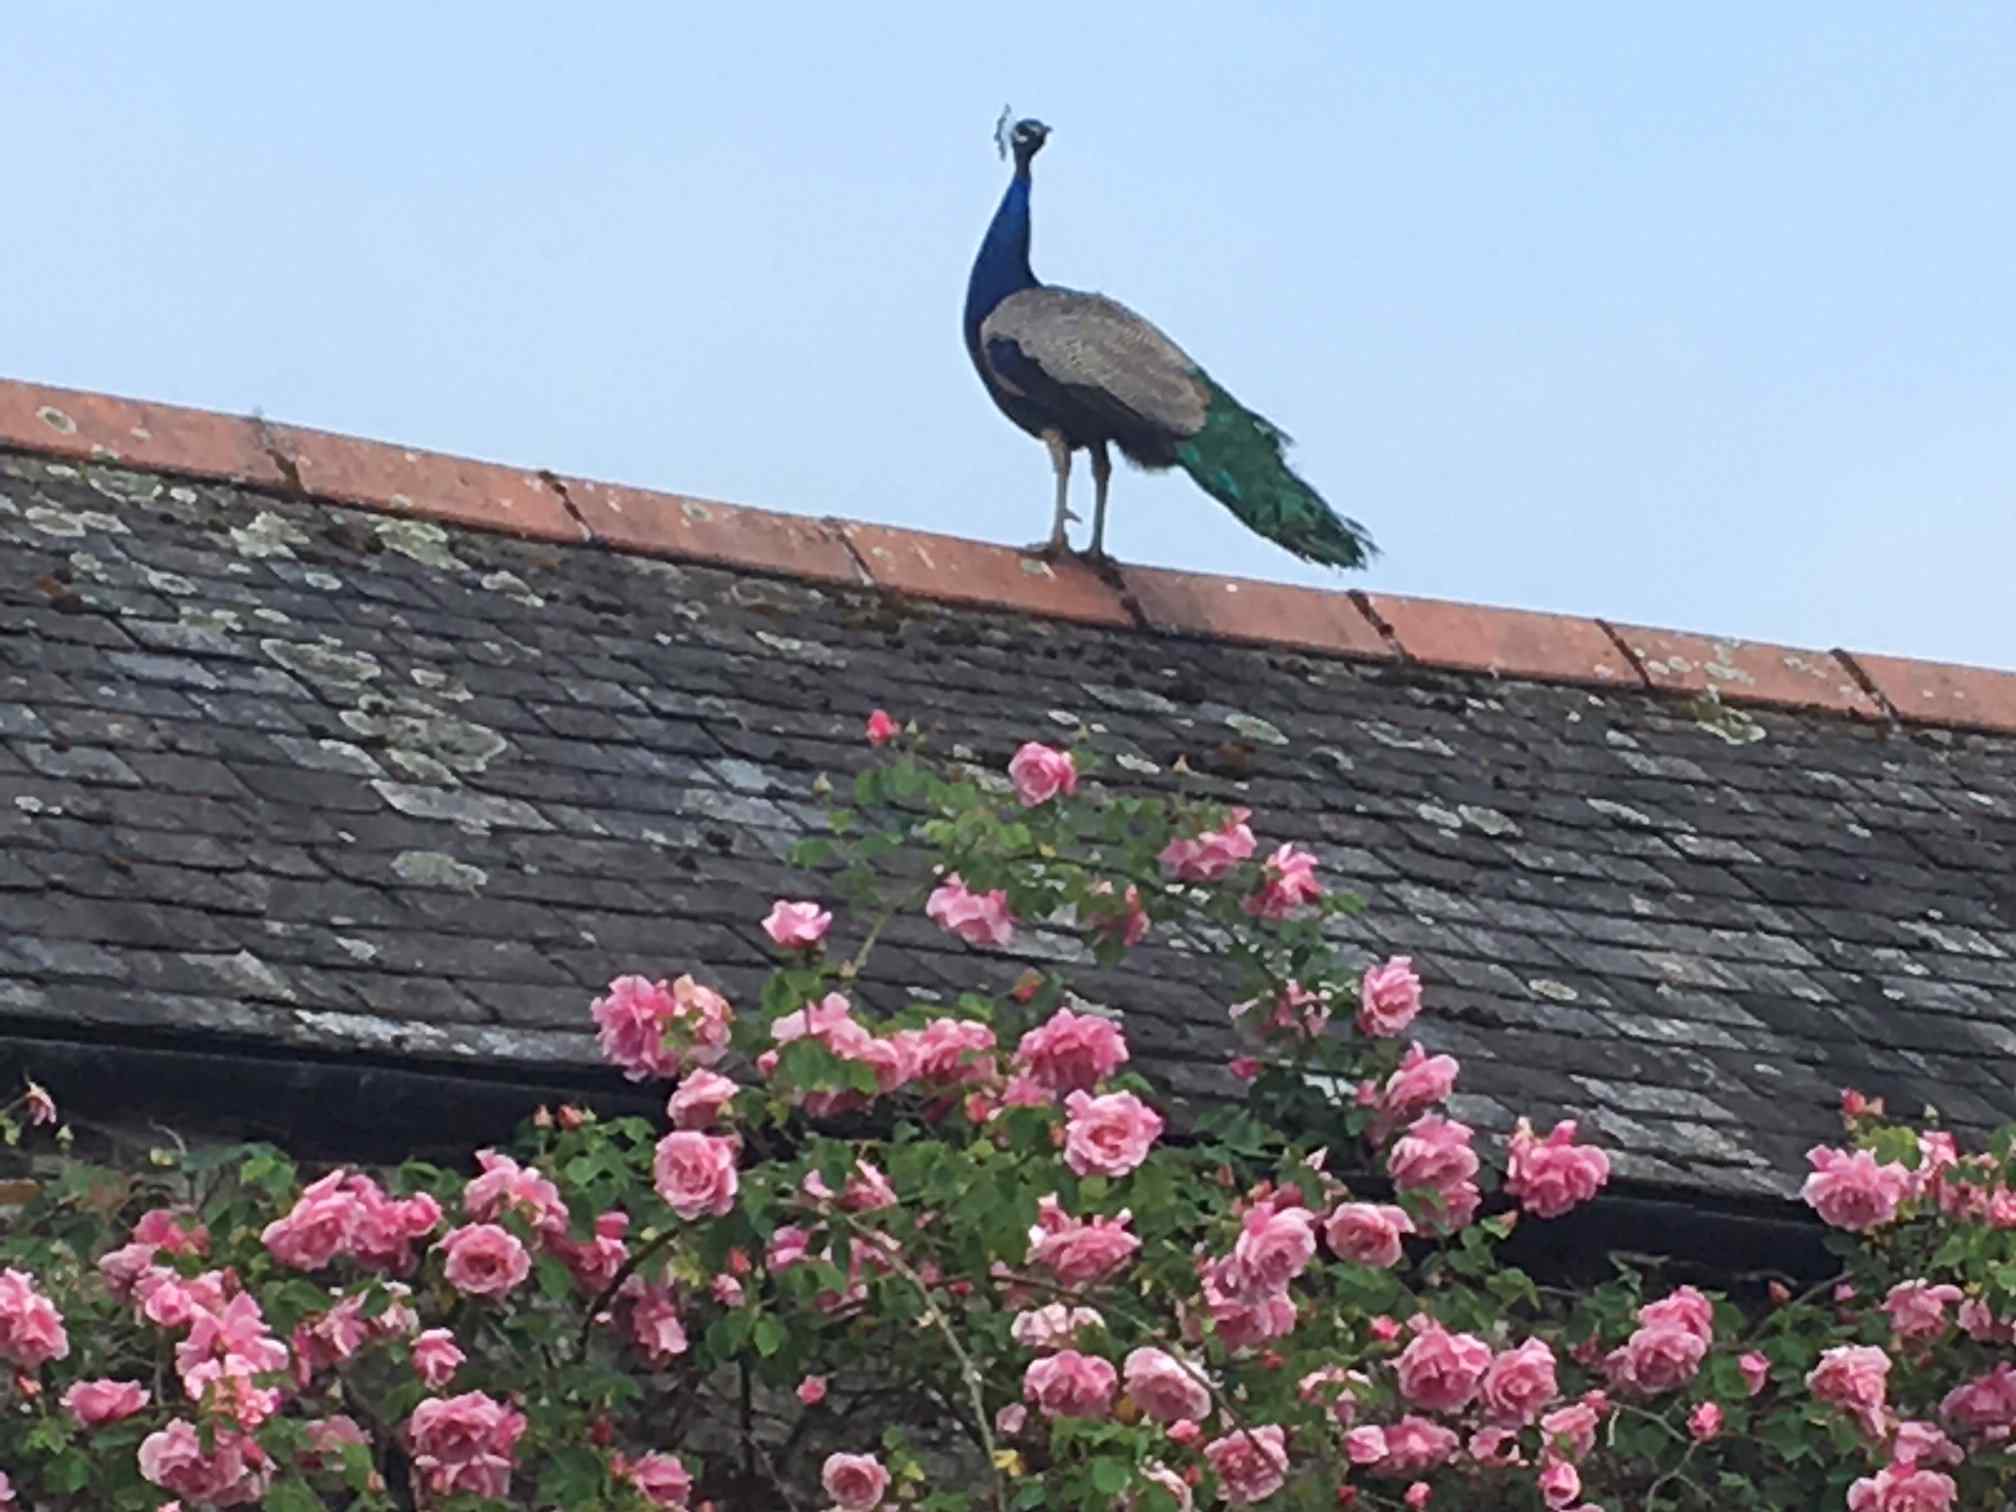 Peacock roosting on the roof